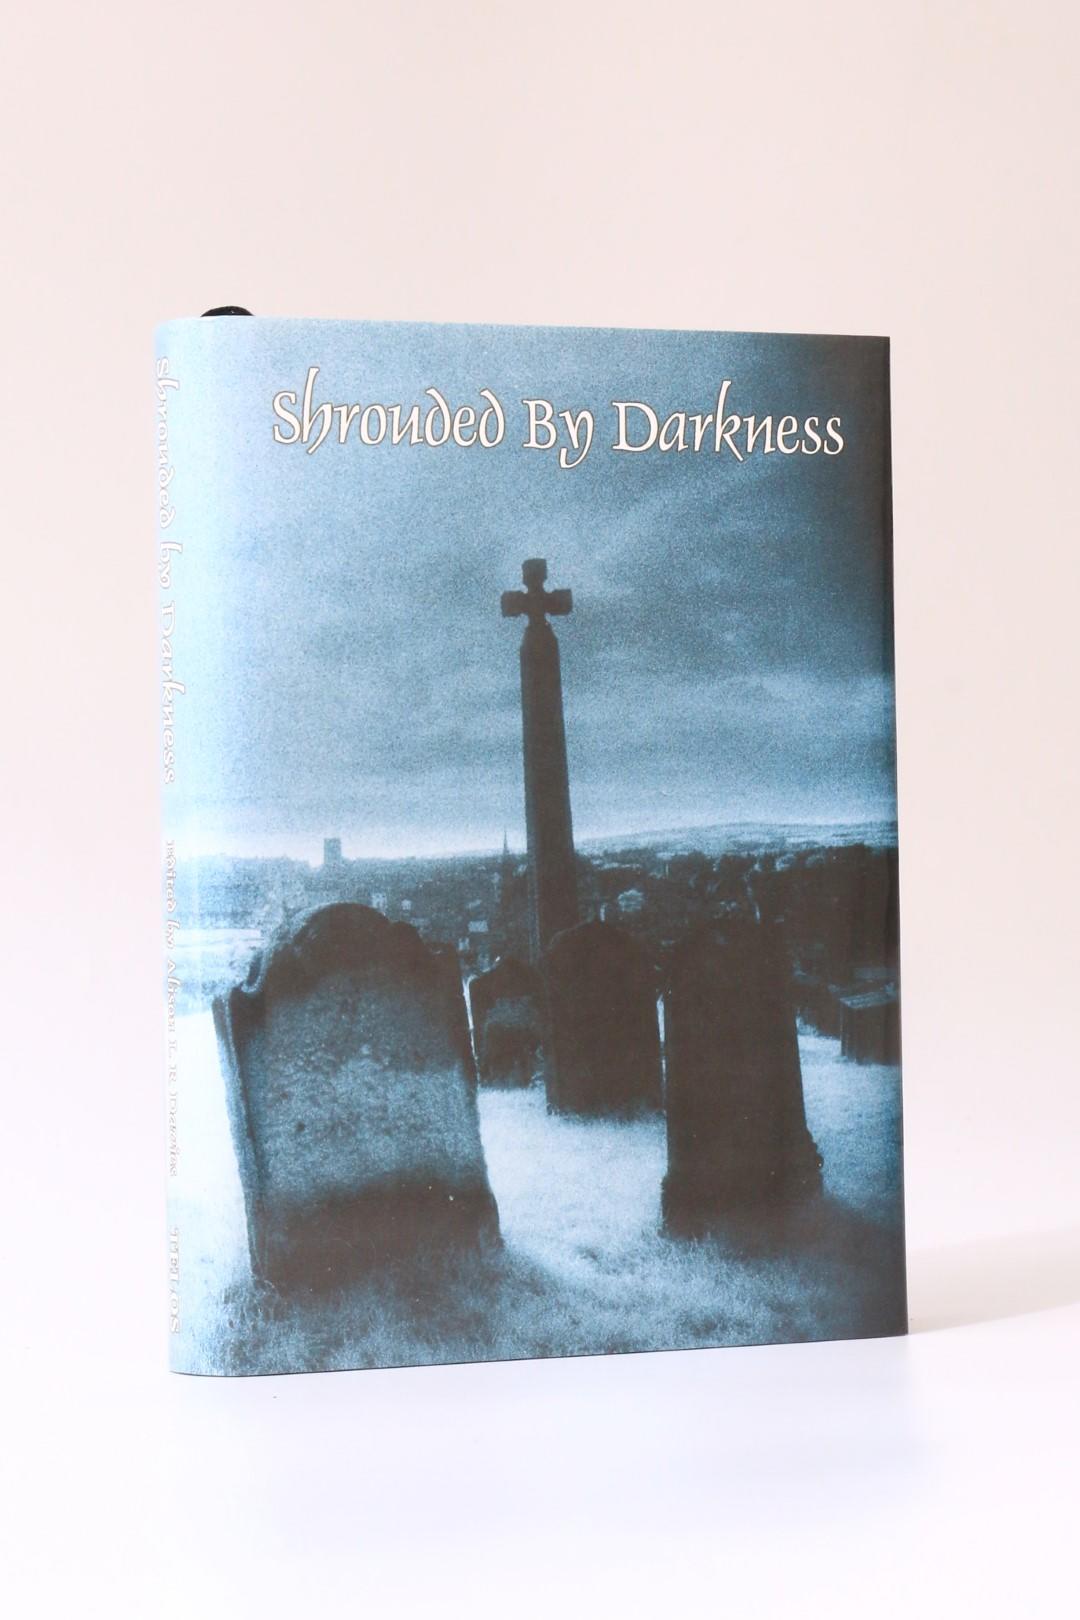 Alison L.R. Davies [ed] - Shrouded by Darkness - Telos, 2006, Signed Limited Edition.